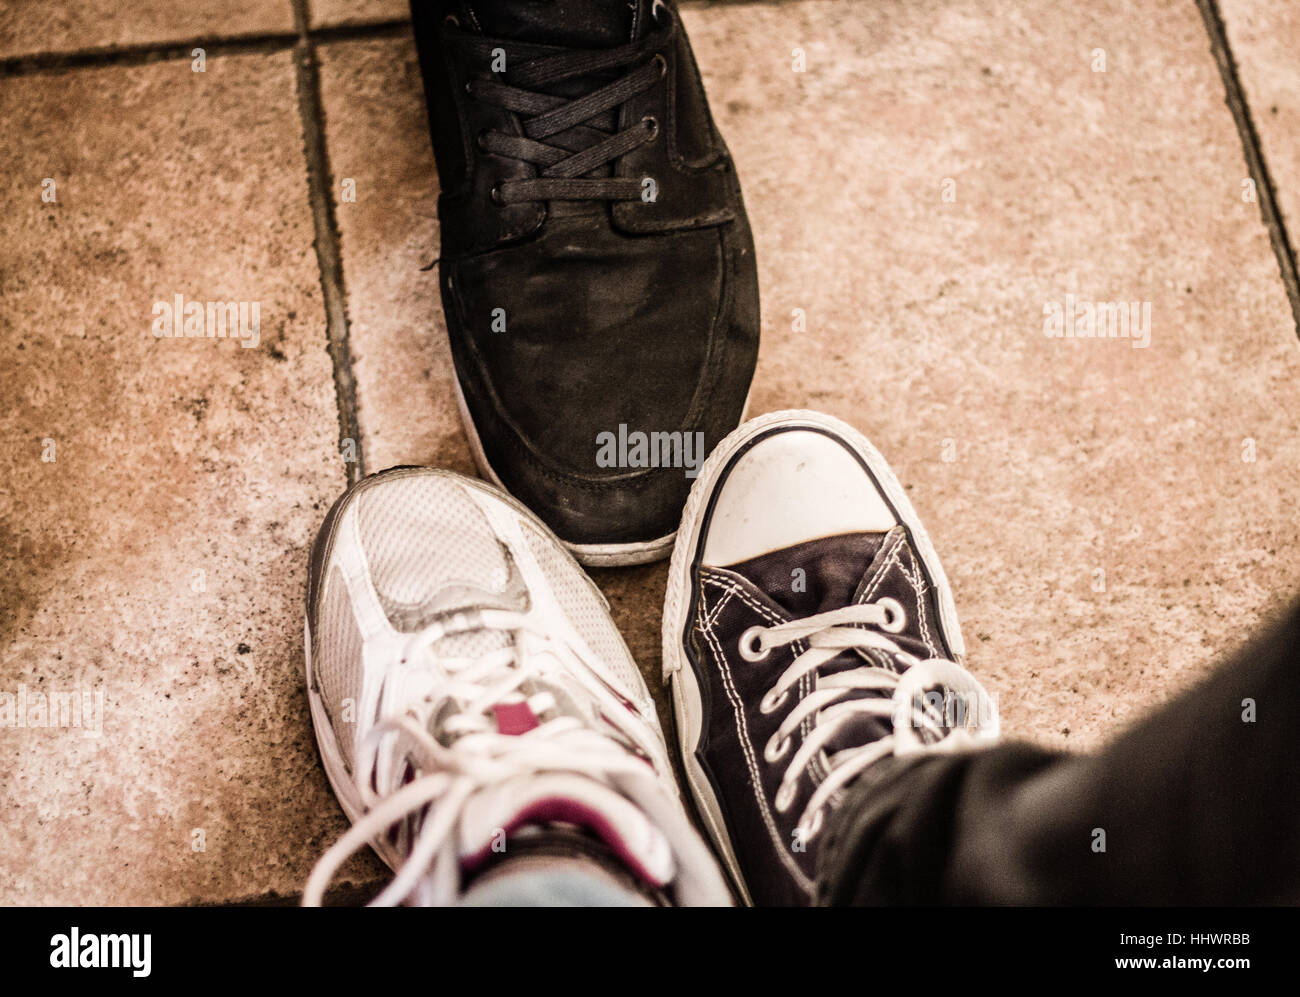 3 Feets of 3 Friends, shoes shot, my classmates Stock Photo